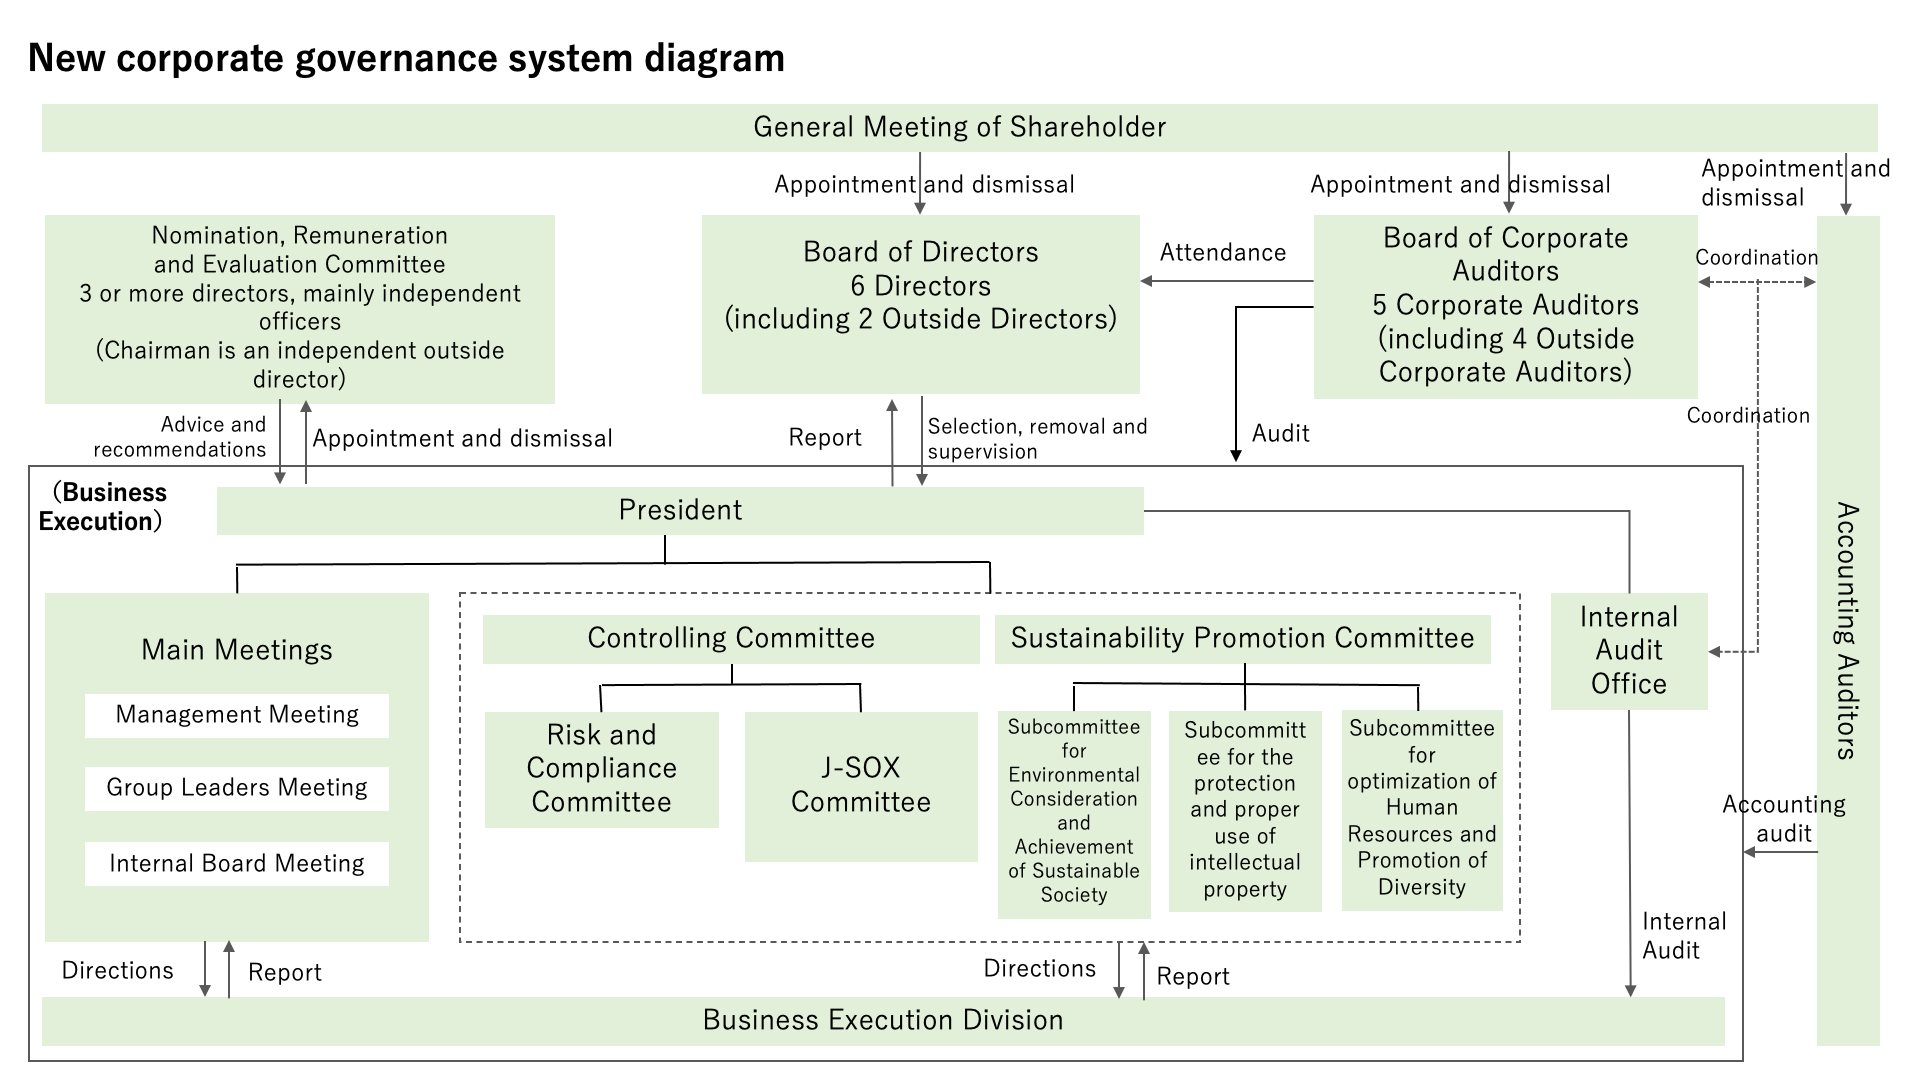 New corporate governance system diagram